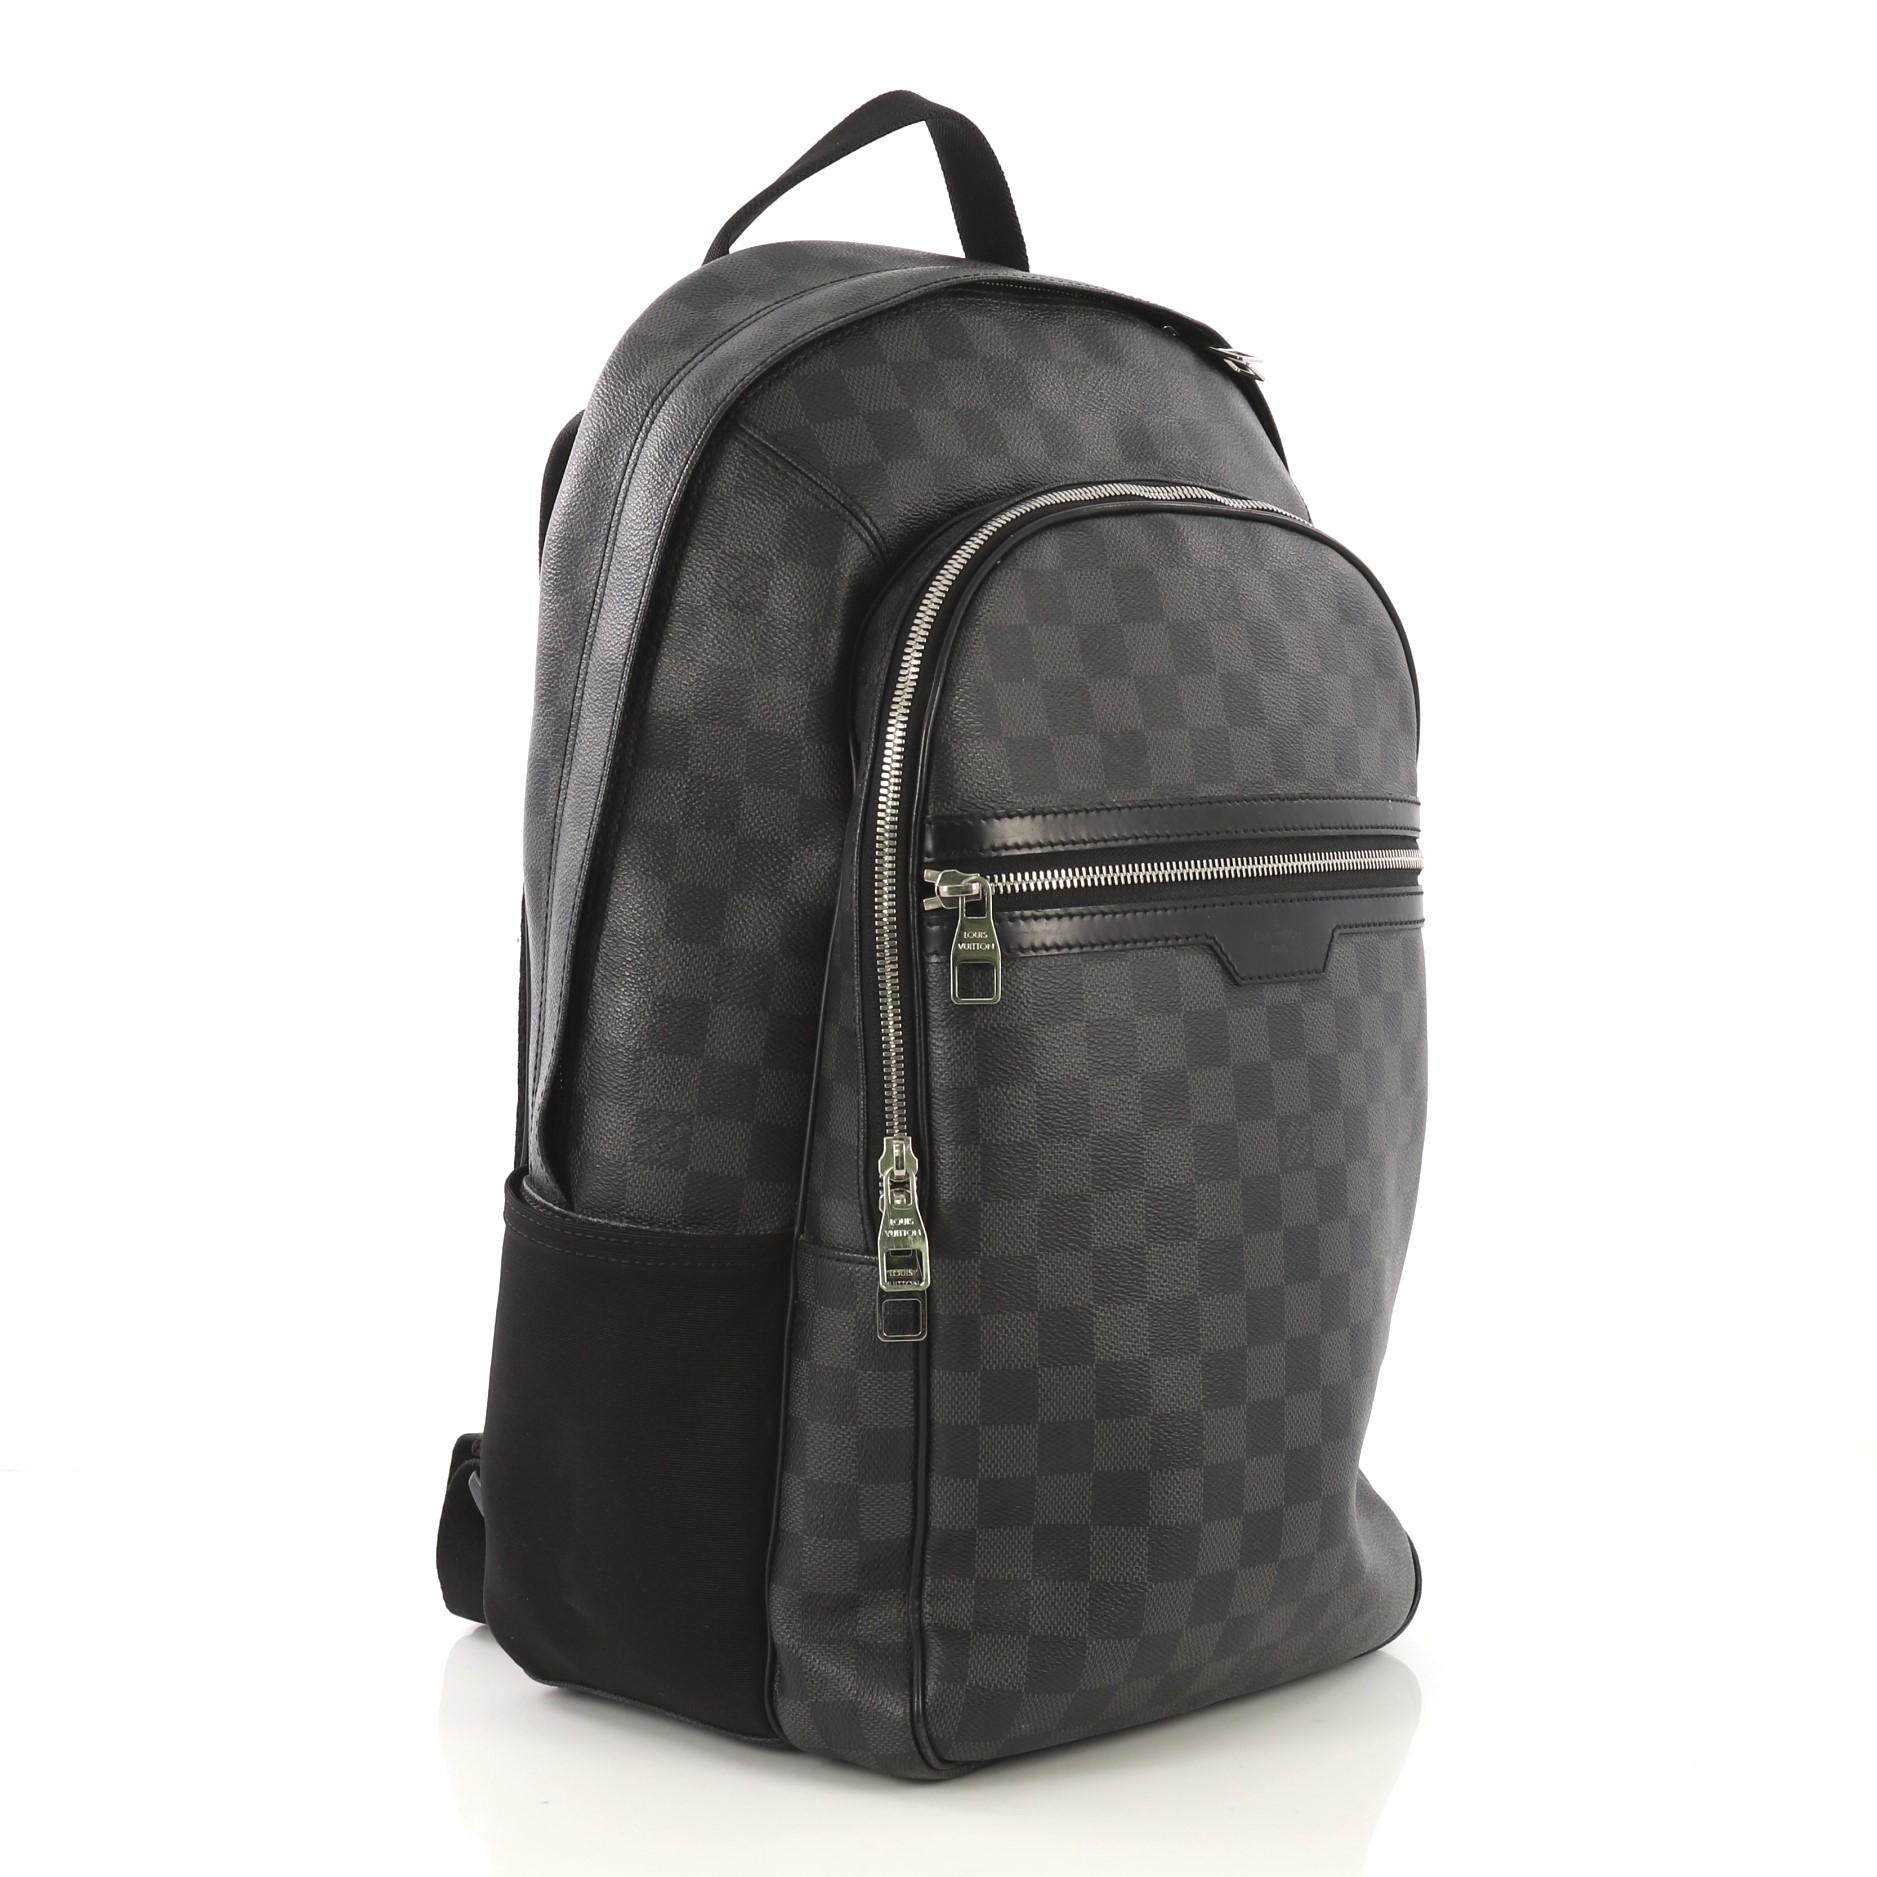 This Louis Vuitton Michael Backpack Damier Graphite, crafted from damier graphite coated canvas and black leather, features top leather handle, canvas padded backpack straps, leather trim, two exterior front zip pockets, and silver-tone hardware.